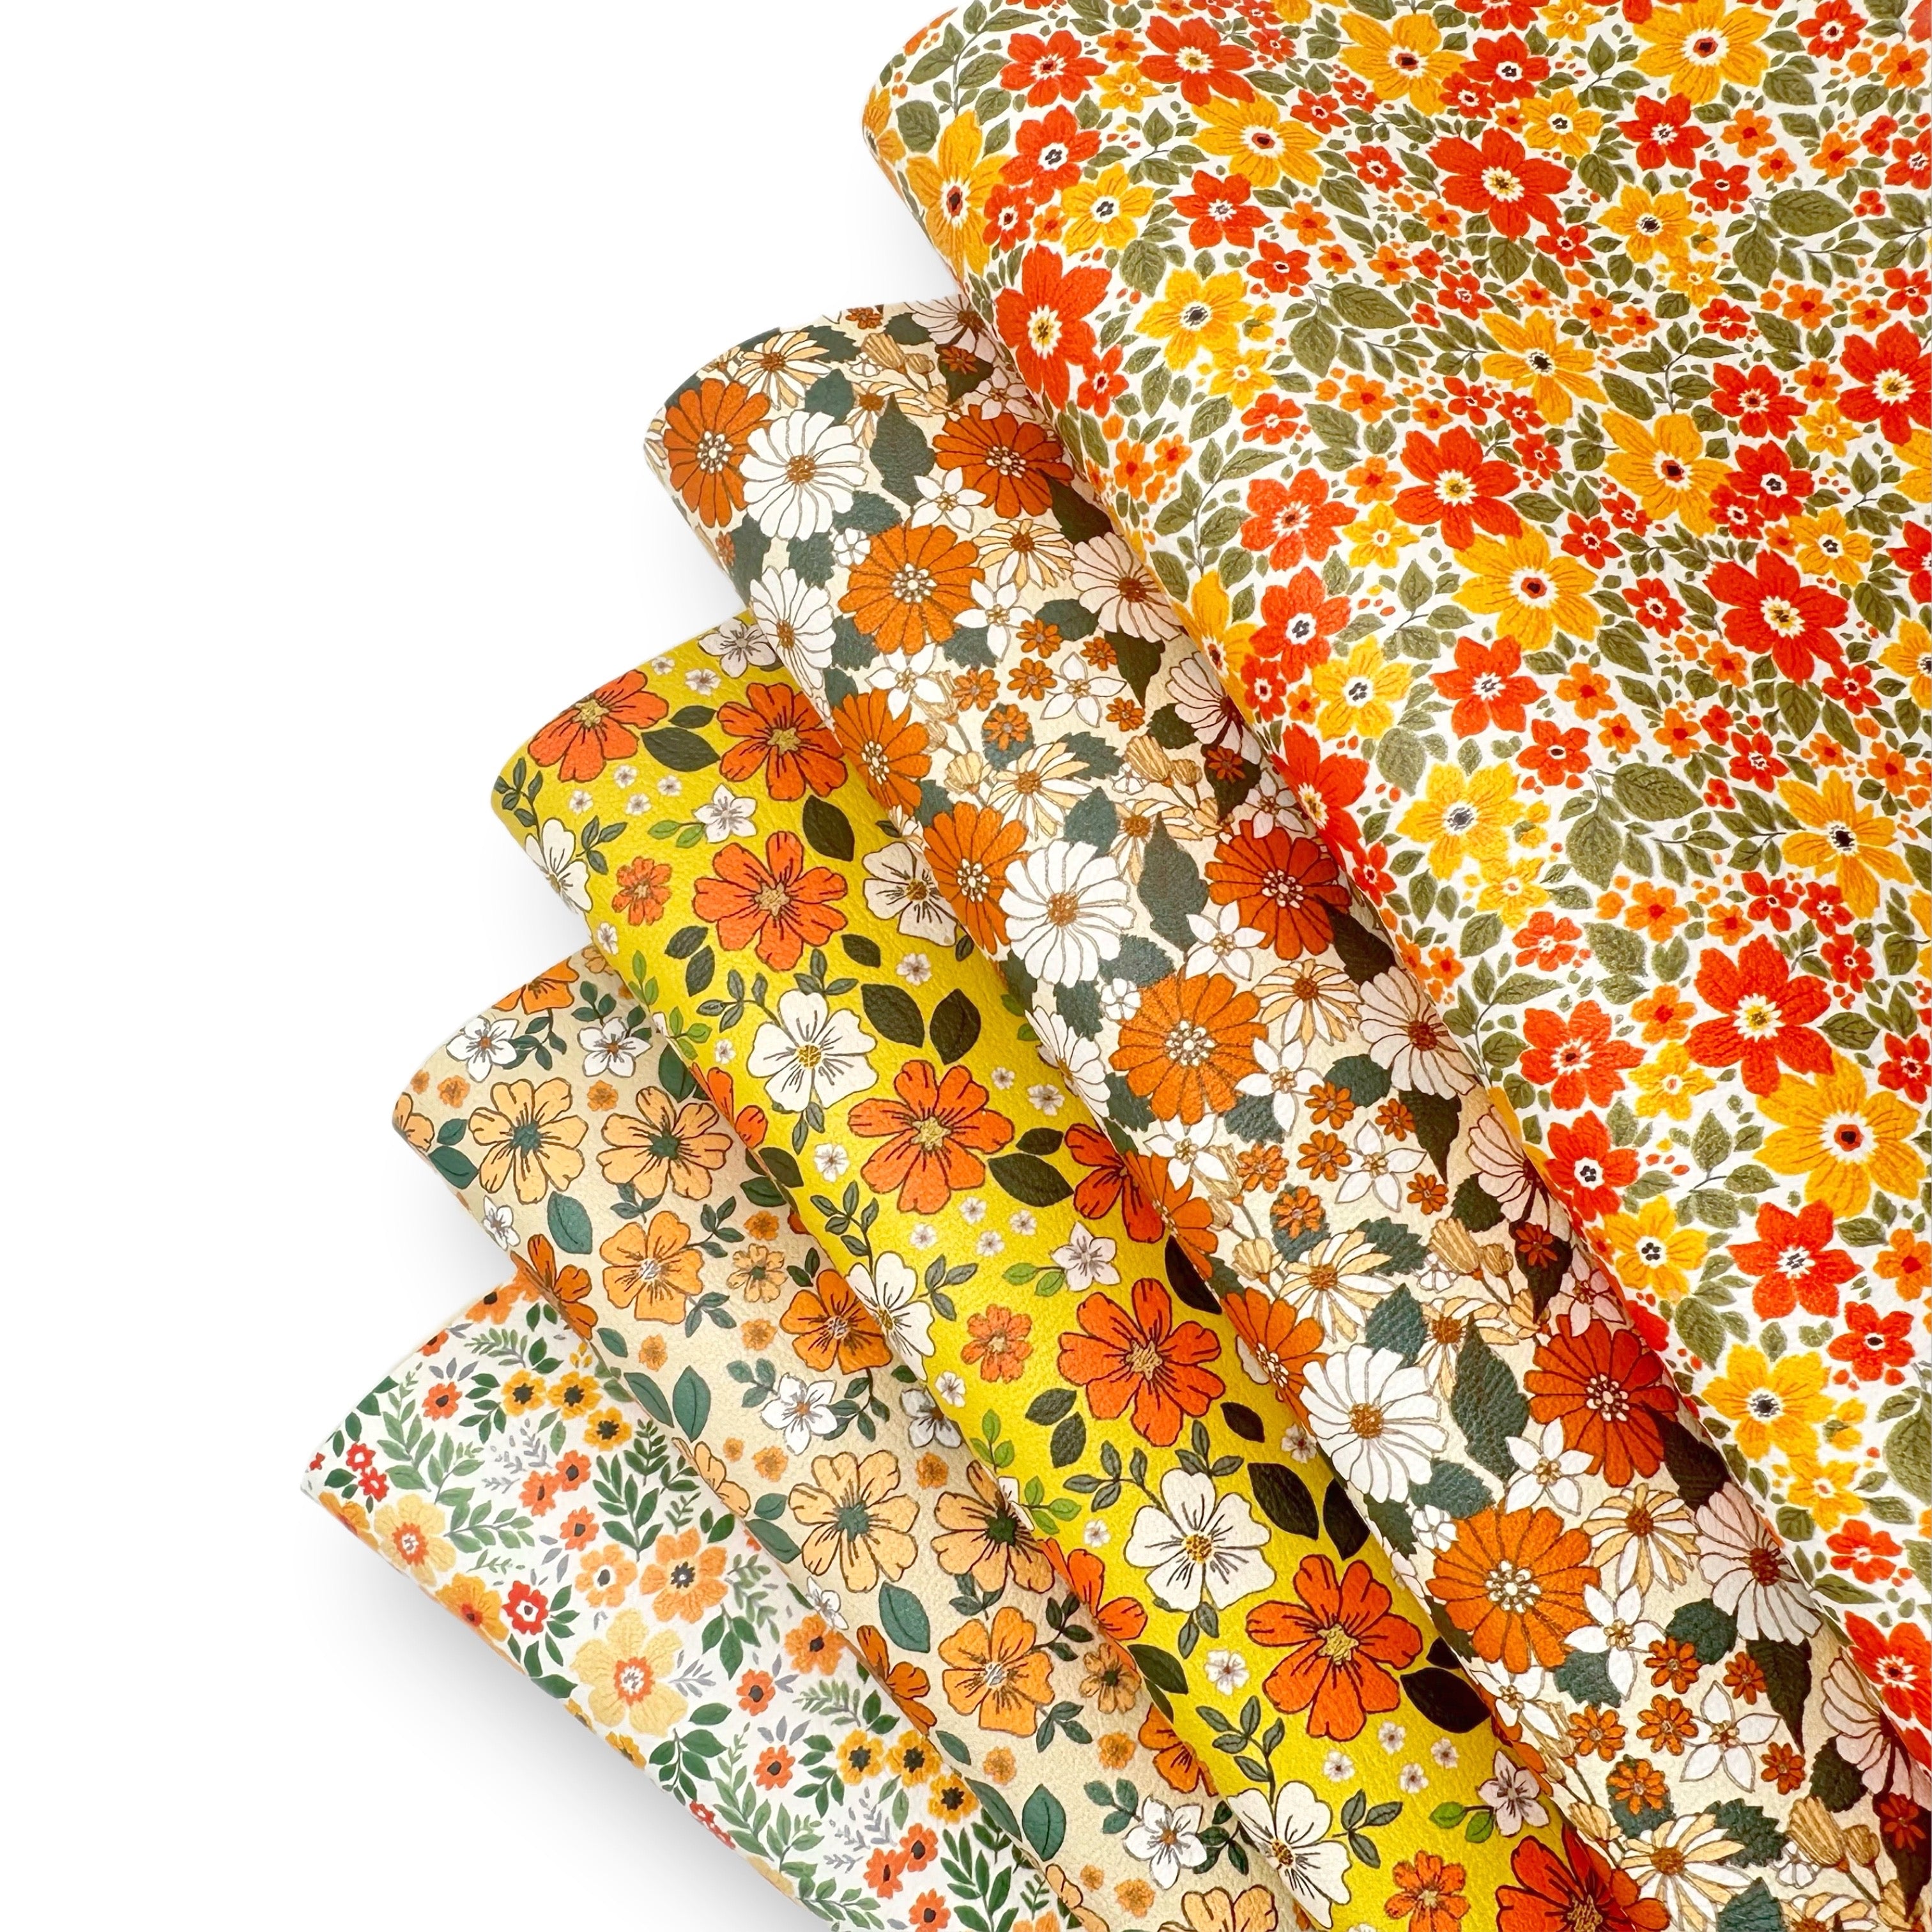 Autumn Ditsy Florals Featured Fabric Collection